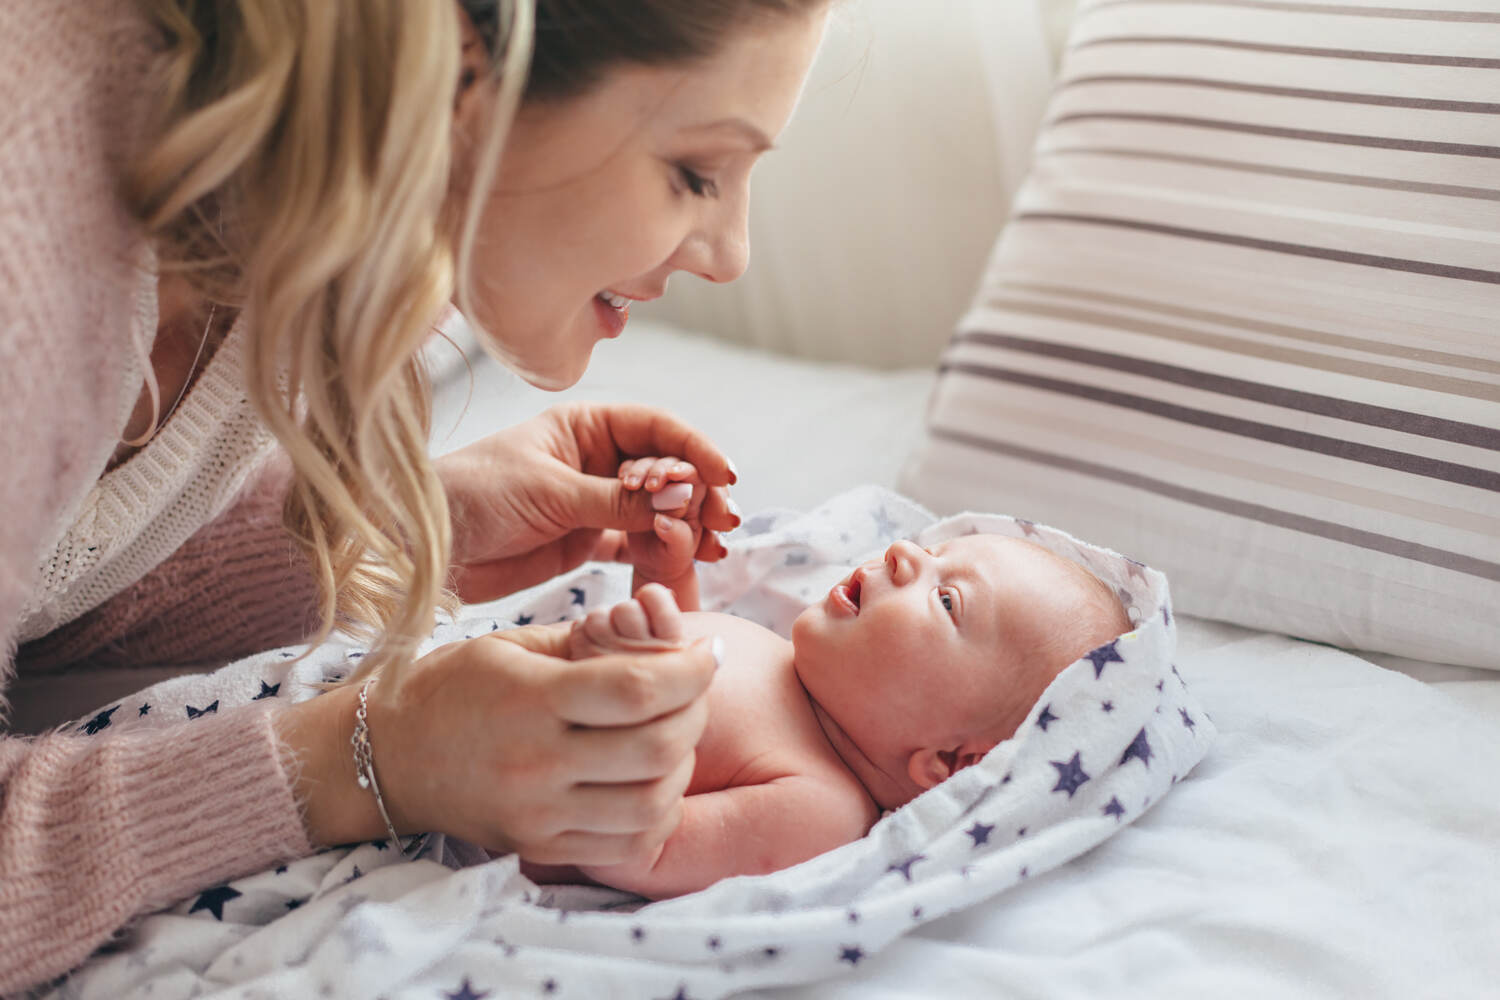 Tips For "Adult Talk With Your Baby"